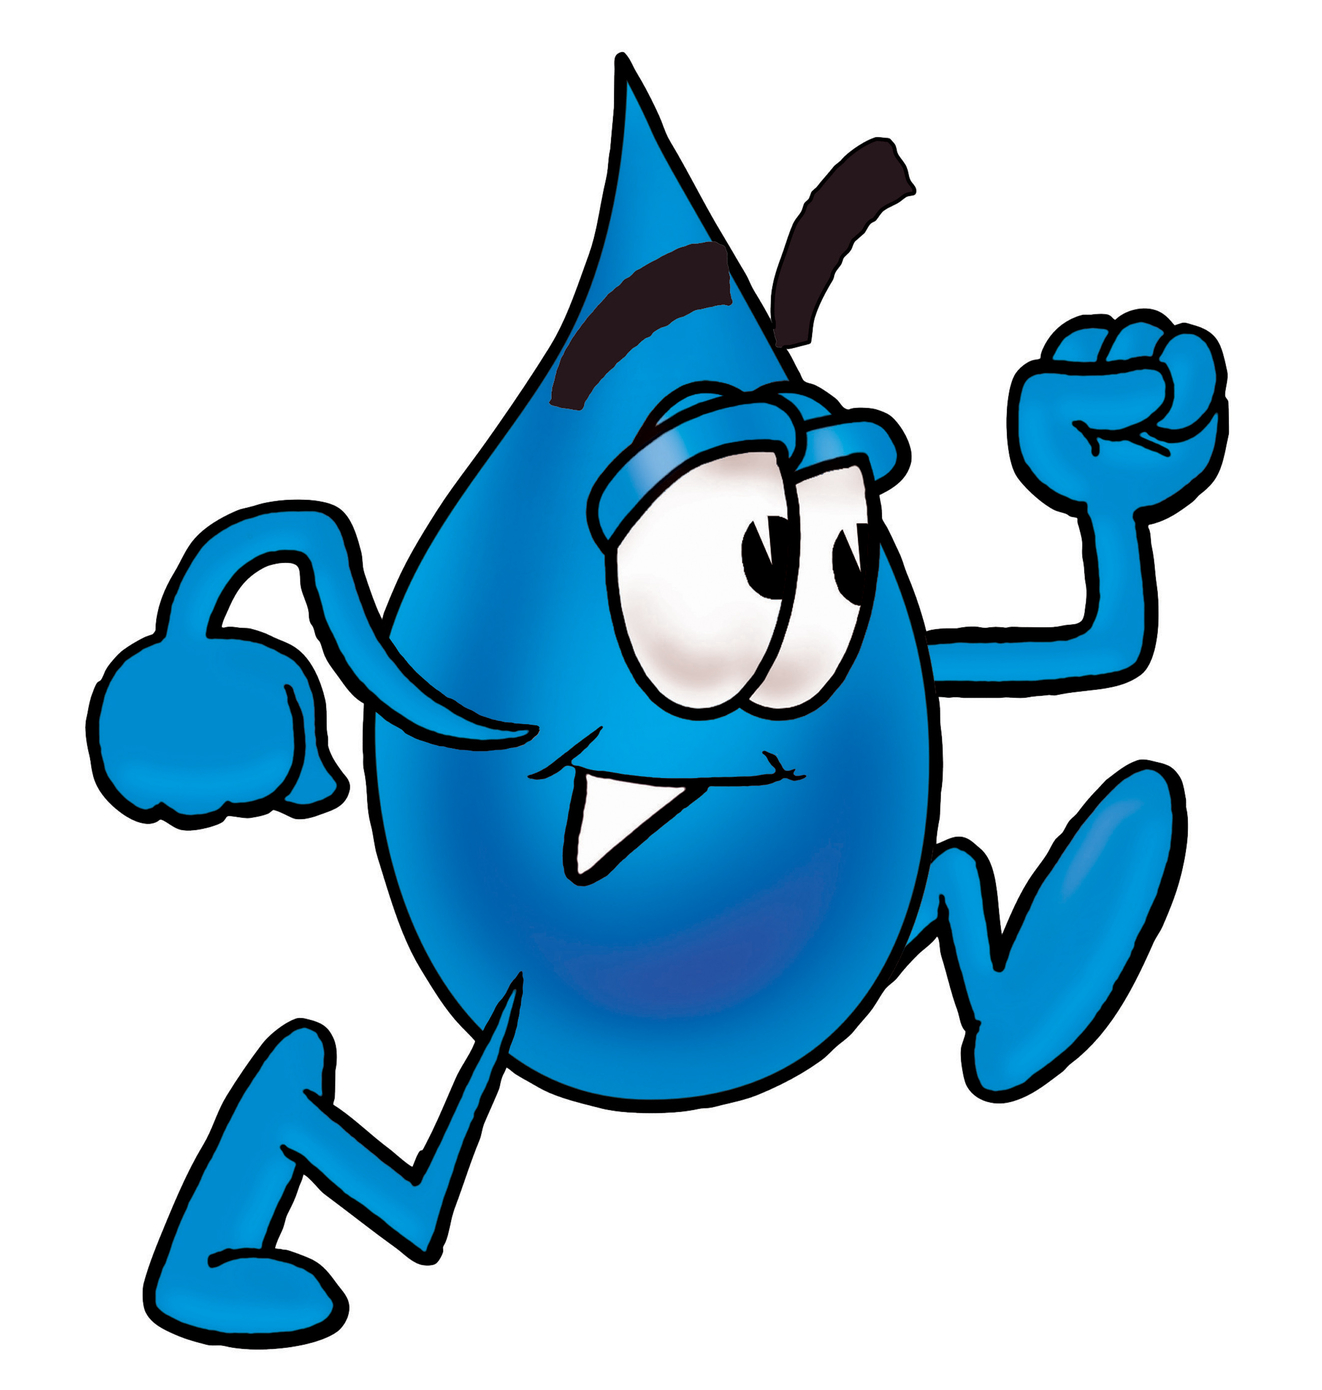 Water Exercise Clip Art Images & Pictures - Becuo